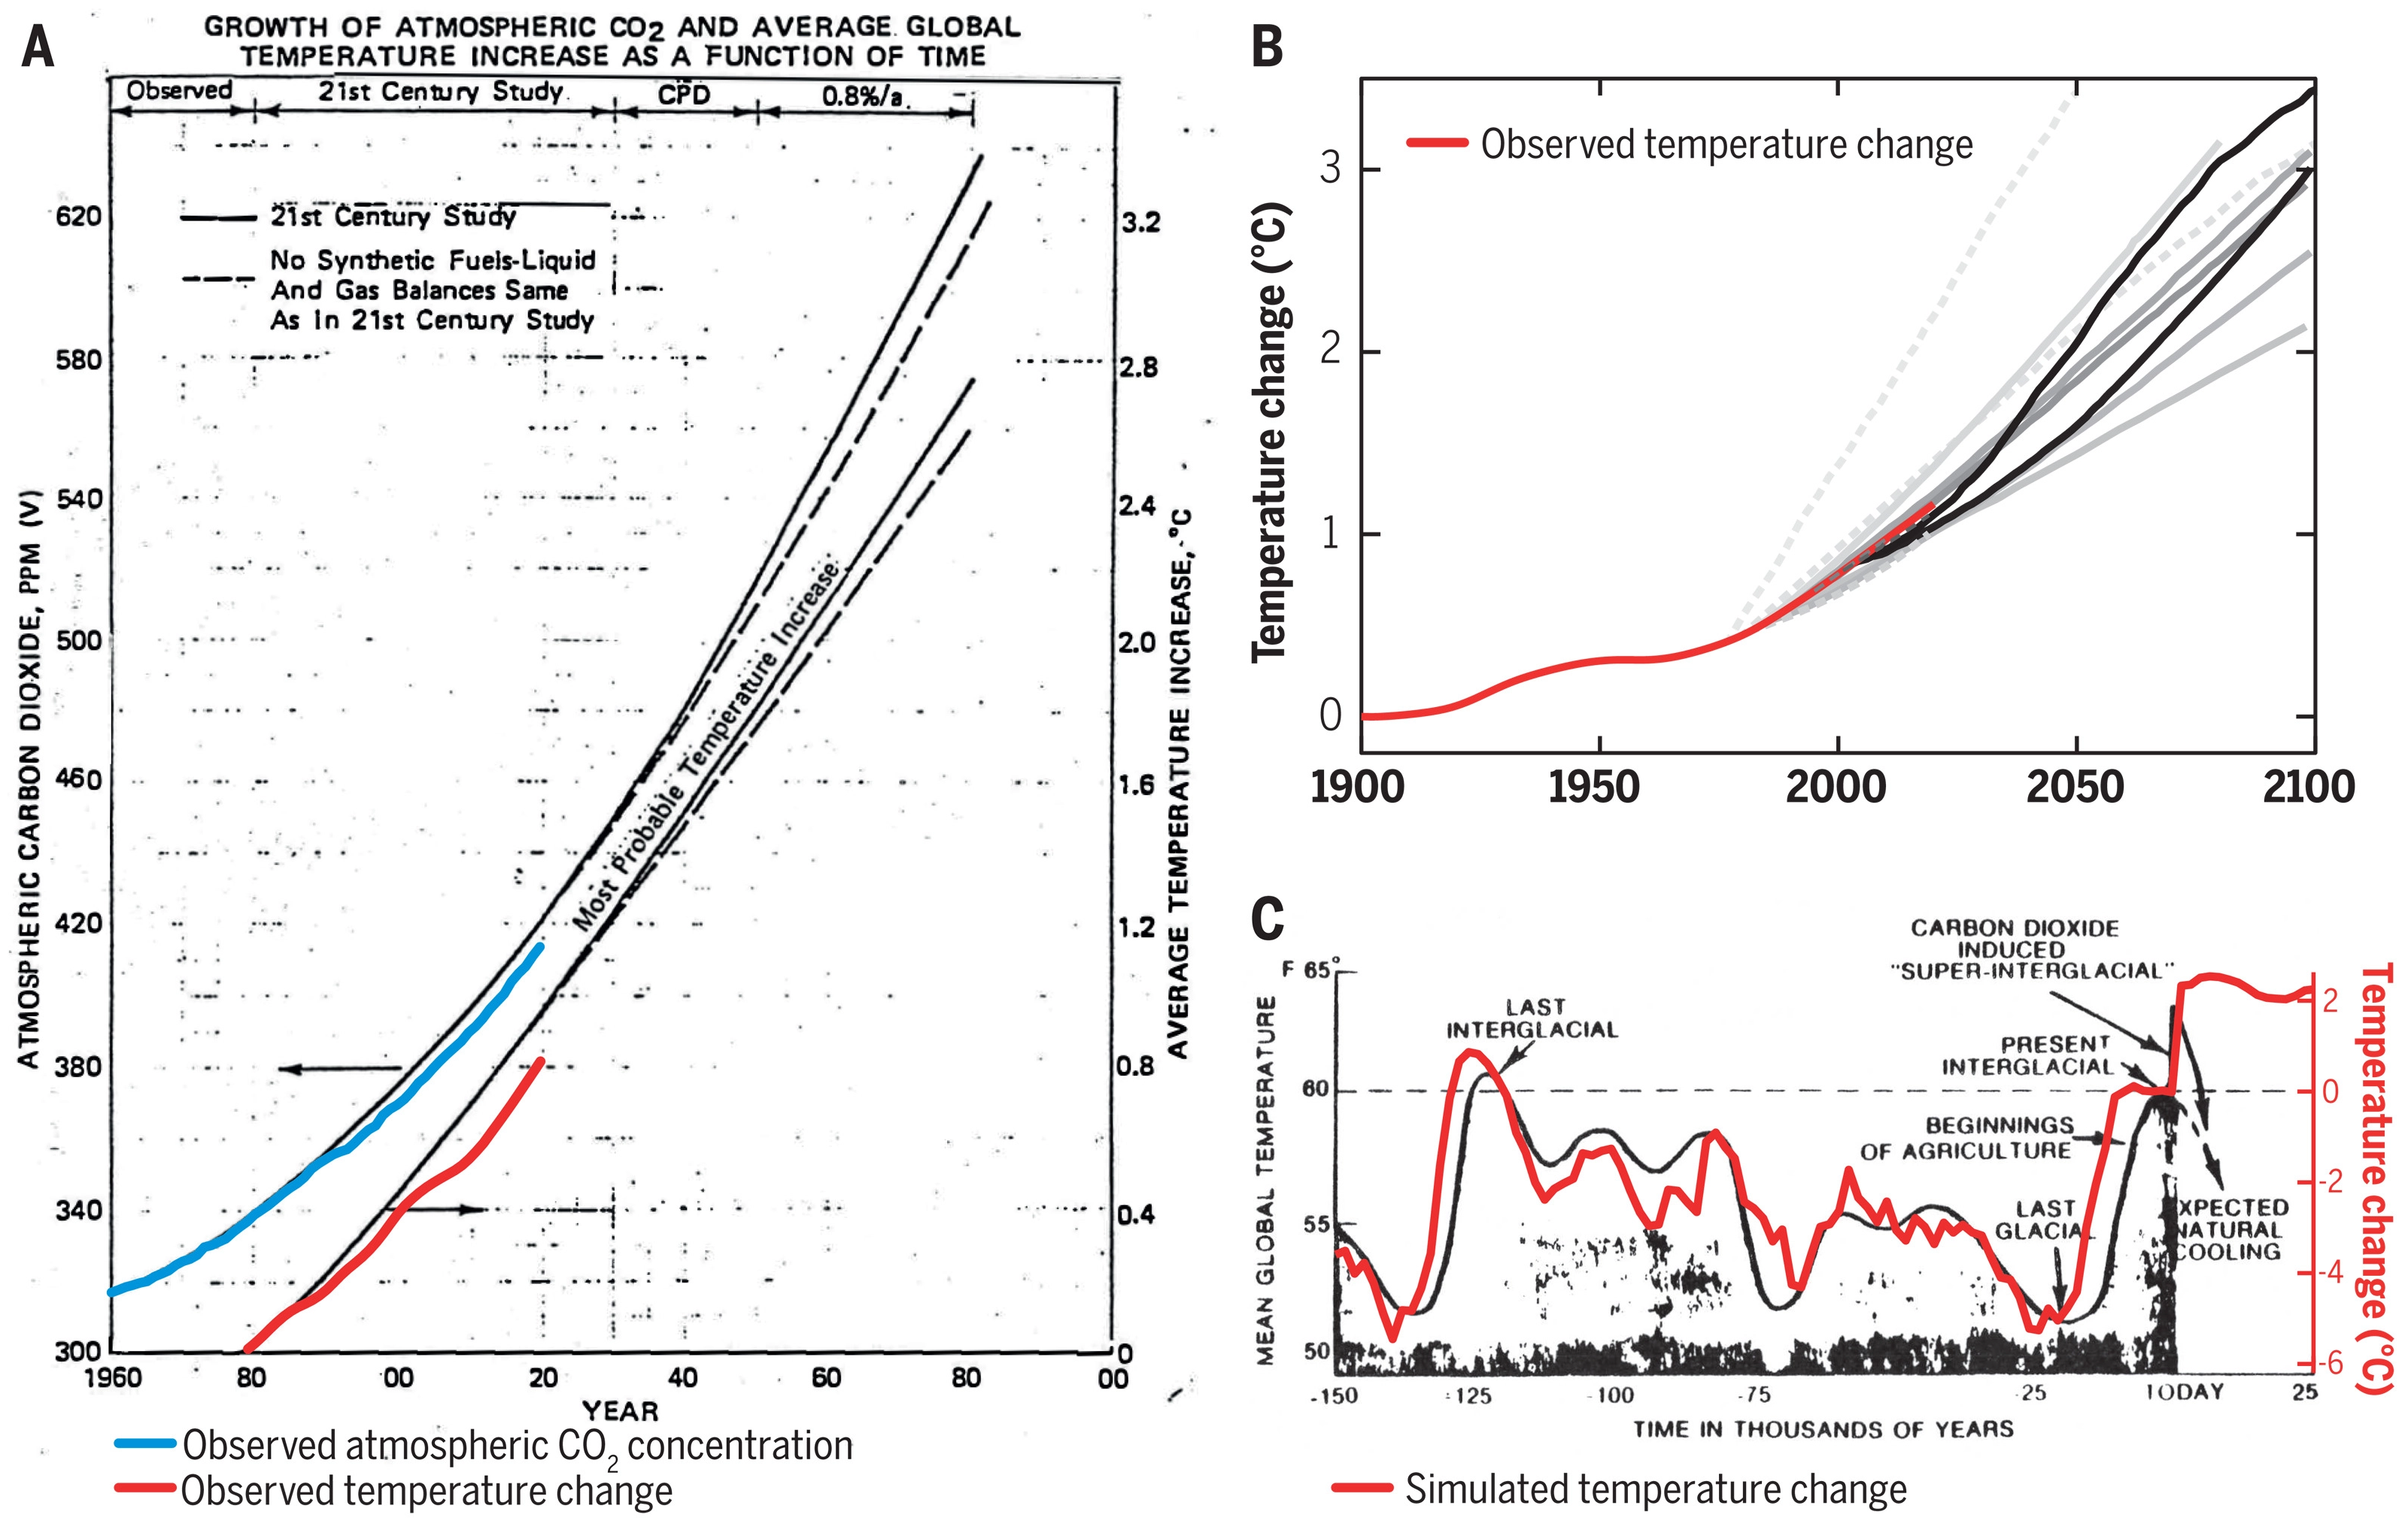 Historically observed temperature change (red) and atmospheric carbon dioxide concentration (blue) over time, compared against global warming projections reported by ExxonMobil scientists. (A) “Proprietary” 1982 Exxon-modeled projections. (B) Summary of projections in seven internal company memos and five peer-reviewed publications between 1977 and 2003 (gray lines). (C) A 1977 internally reported graph of the global warming “effect of CO2 on an interglacial scale.” (A) and (B) display averaged historical temperature observations, whereas the historical temperature record in (C) is a smoothed Earth system model simulation of the last 150,000 years. Graphic: Supran, et al., 2023 / Science